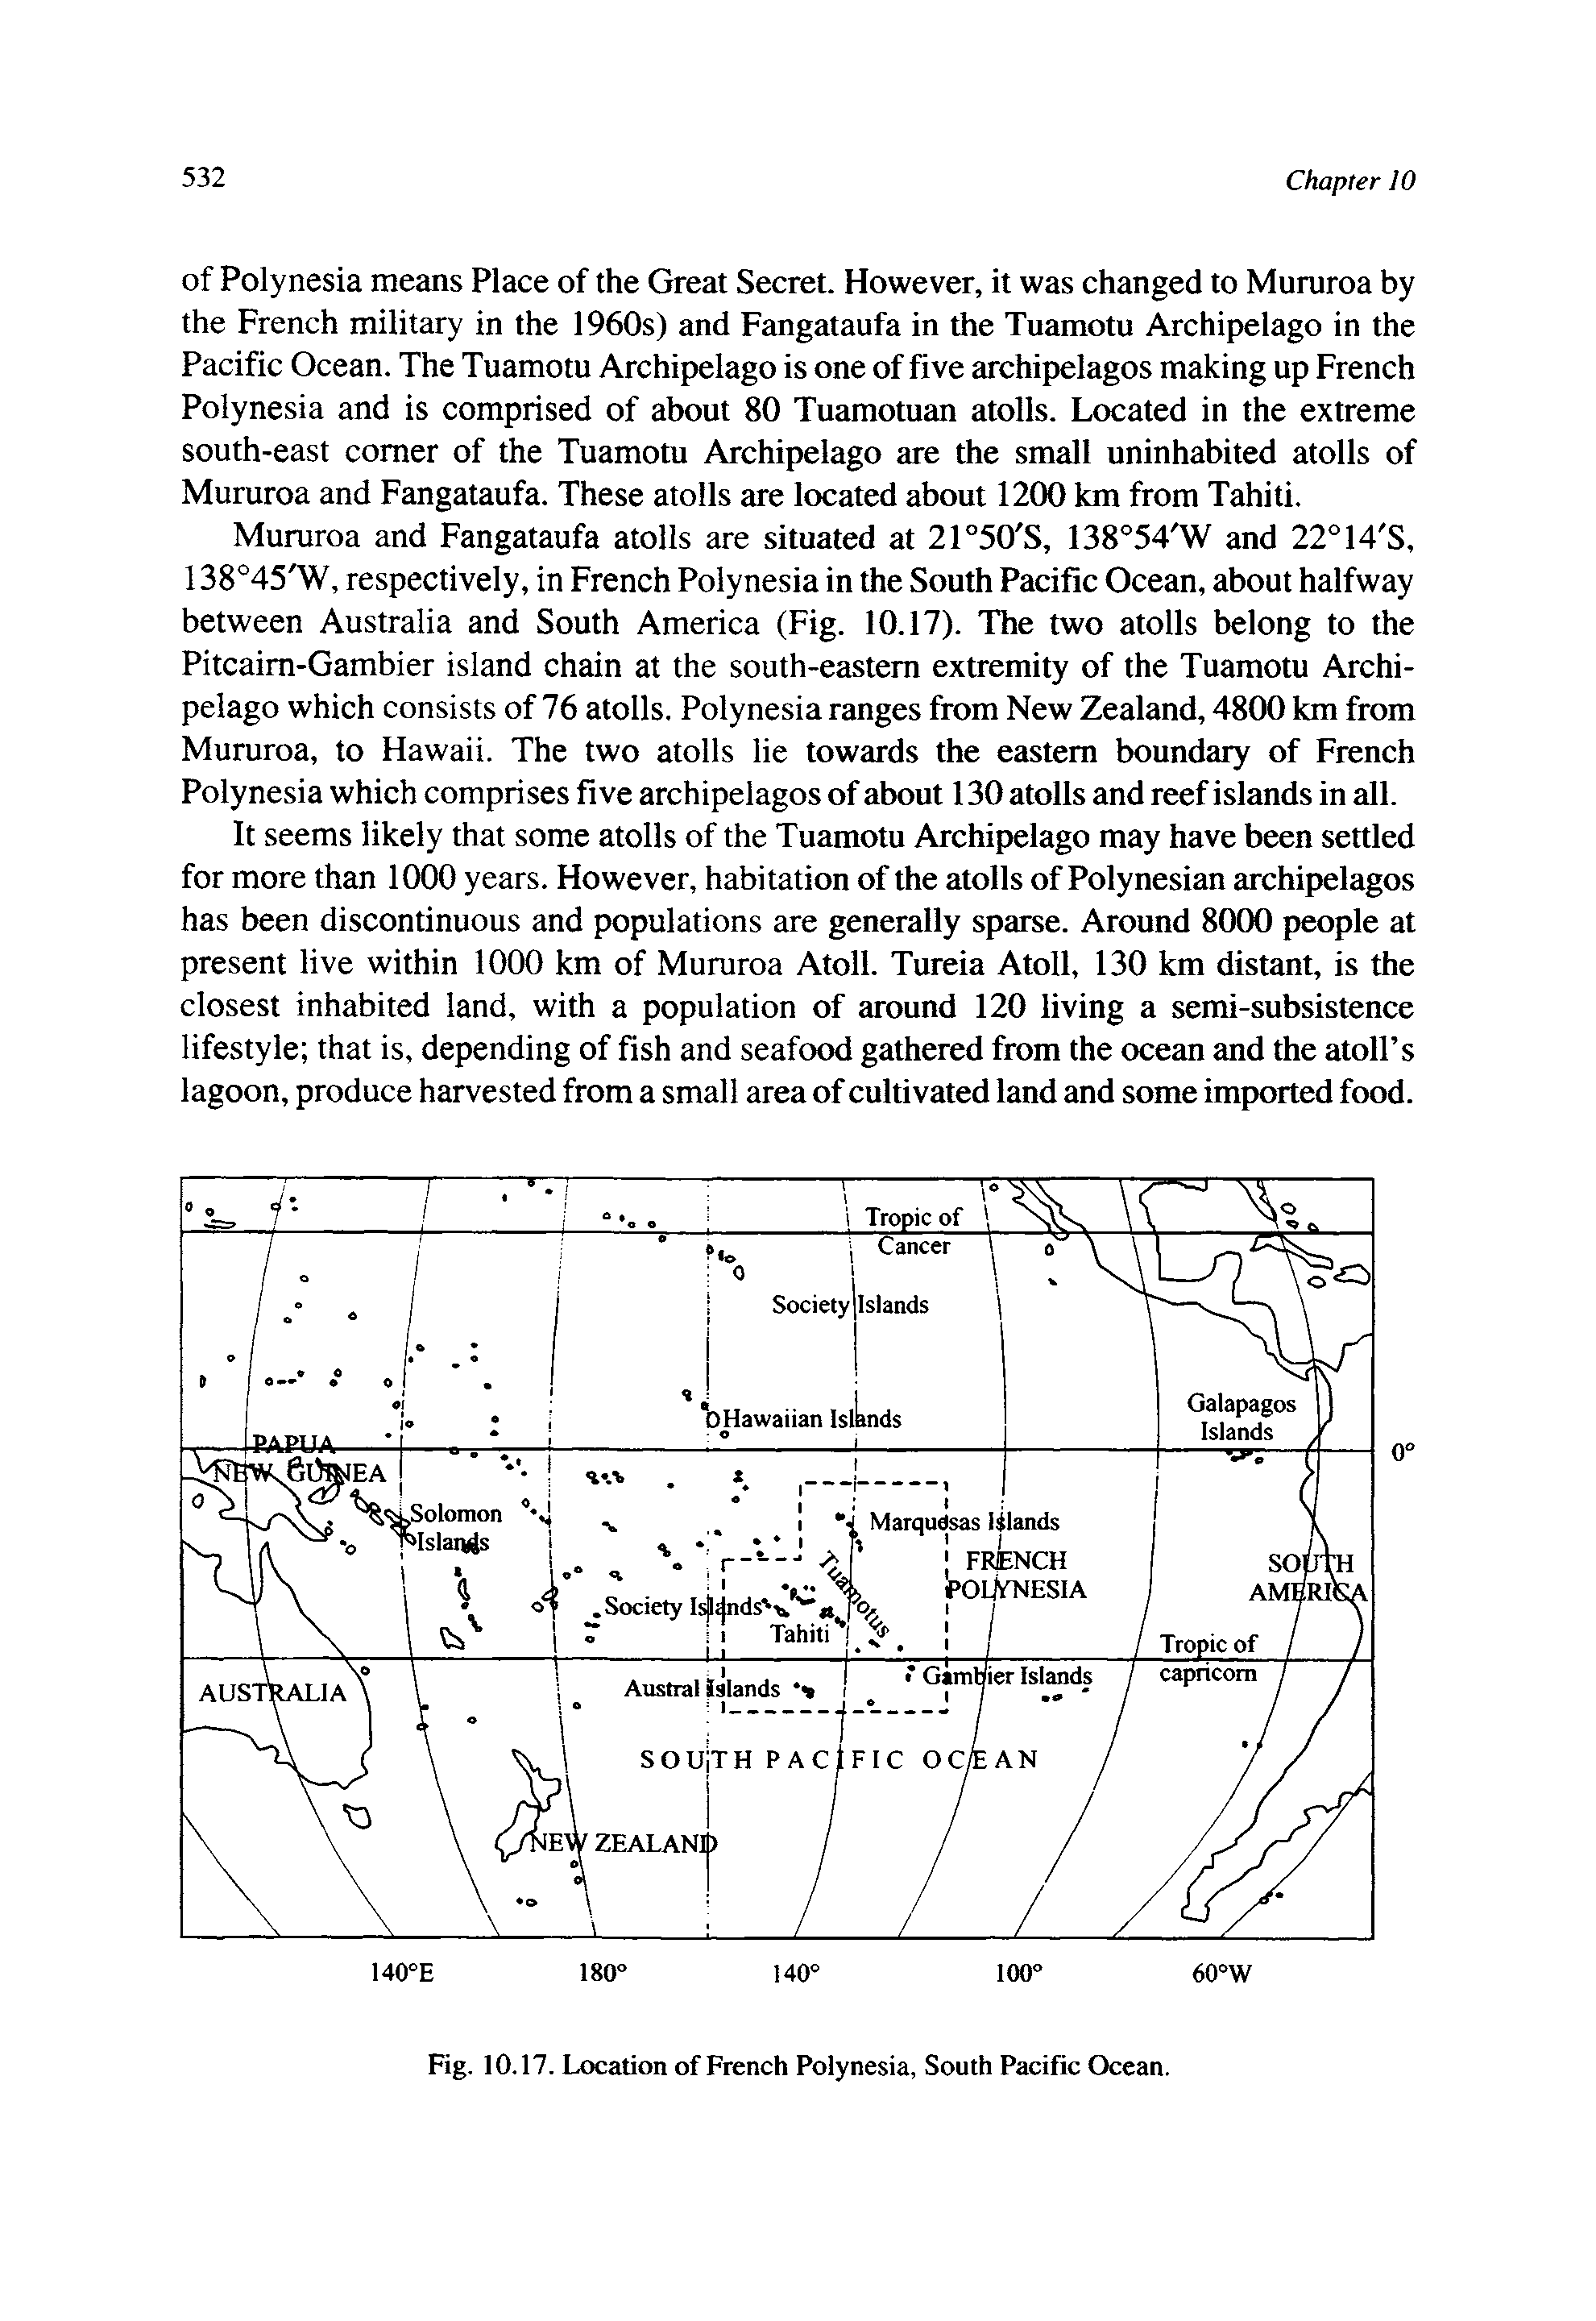 Fig. 10.17. Location of French Polynesia, South Pacific Ocean.